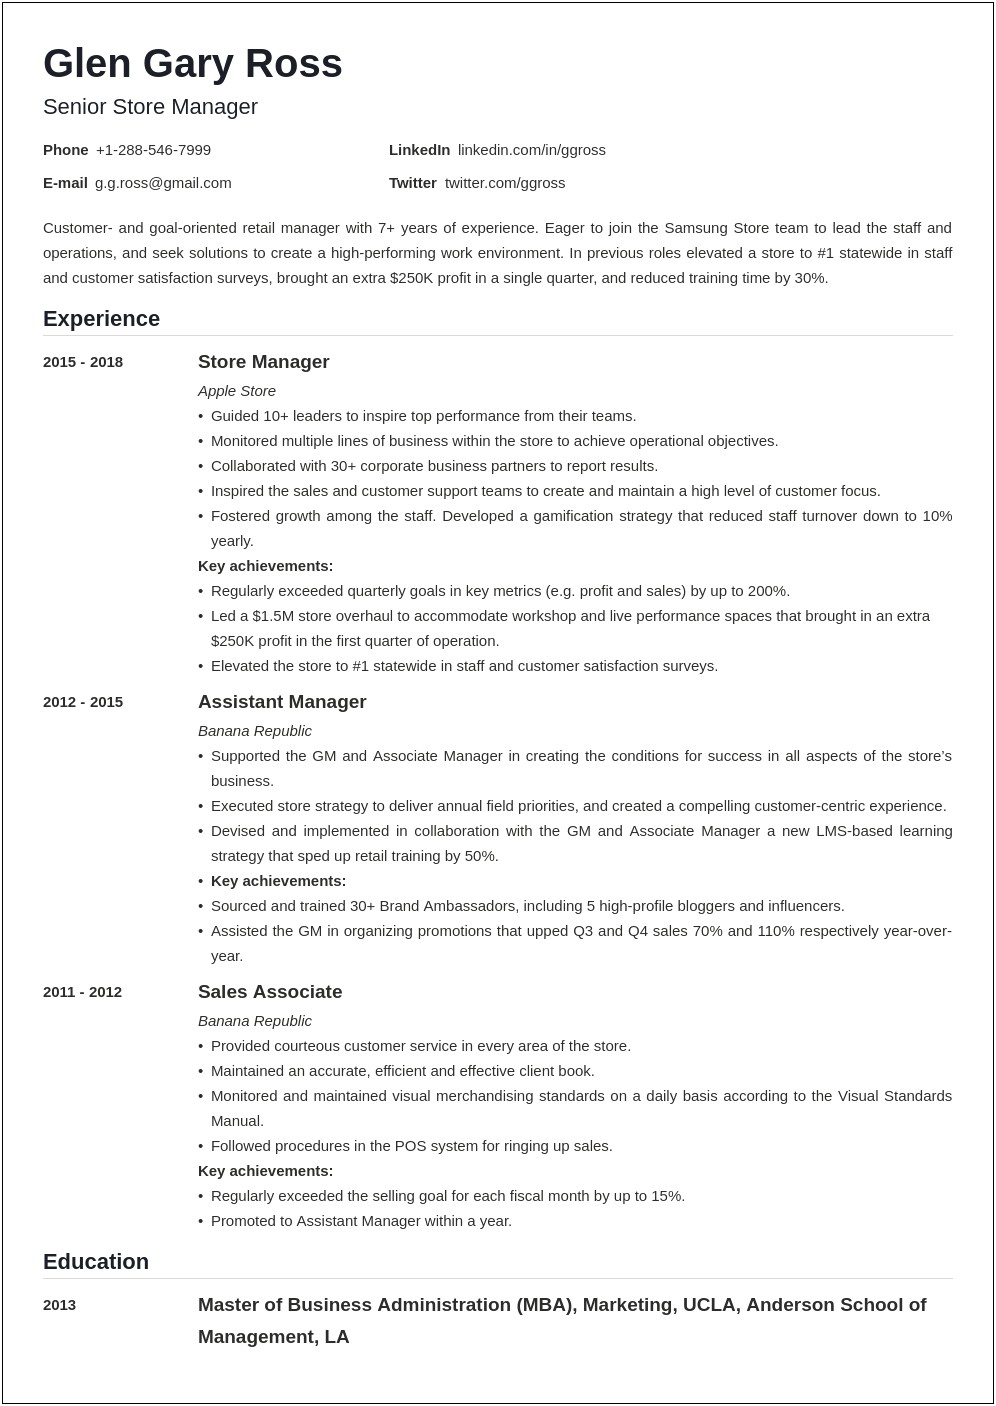 Good Summary For Guest Service Resume